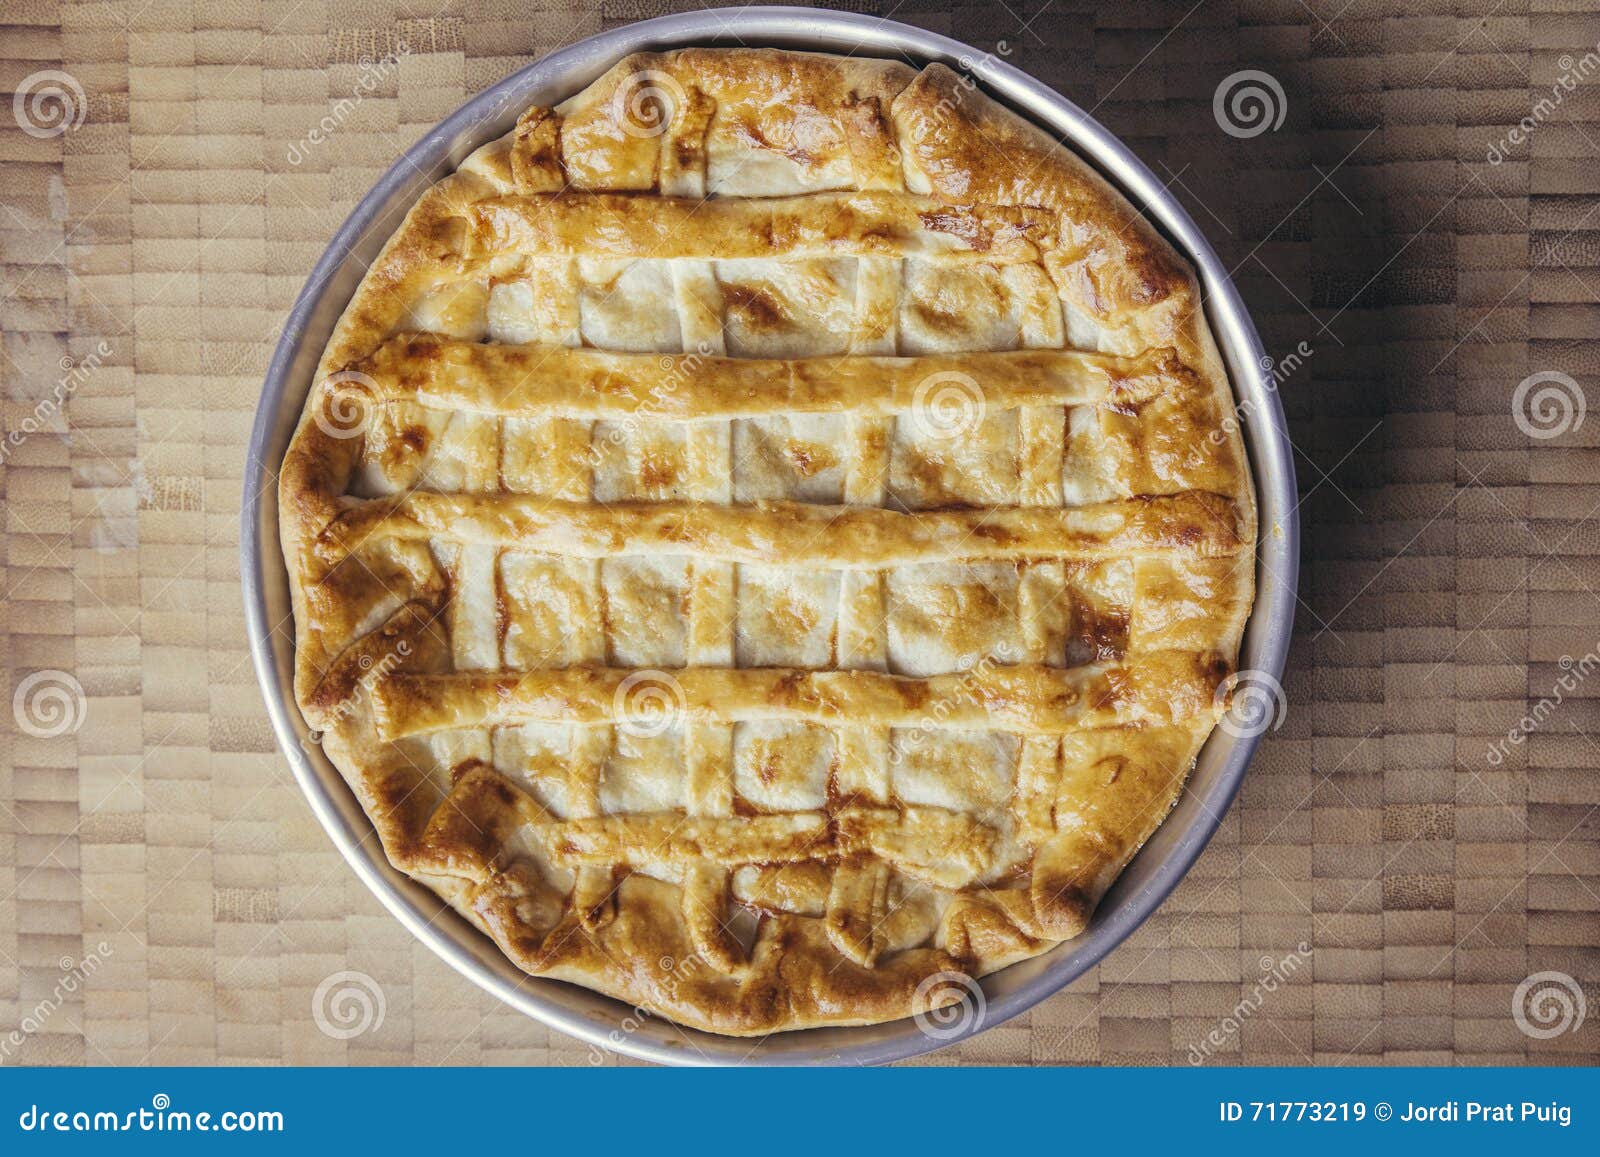 rustic meat striped pie on a wooden background